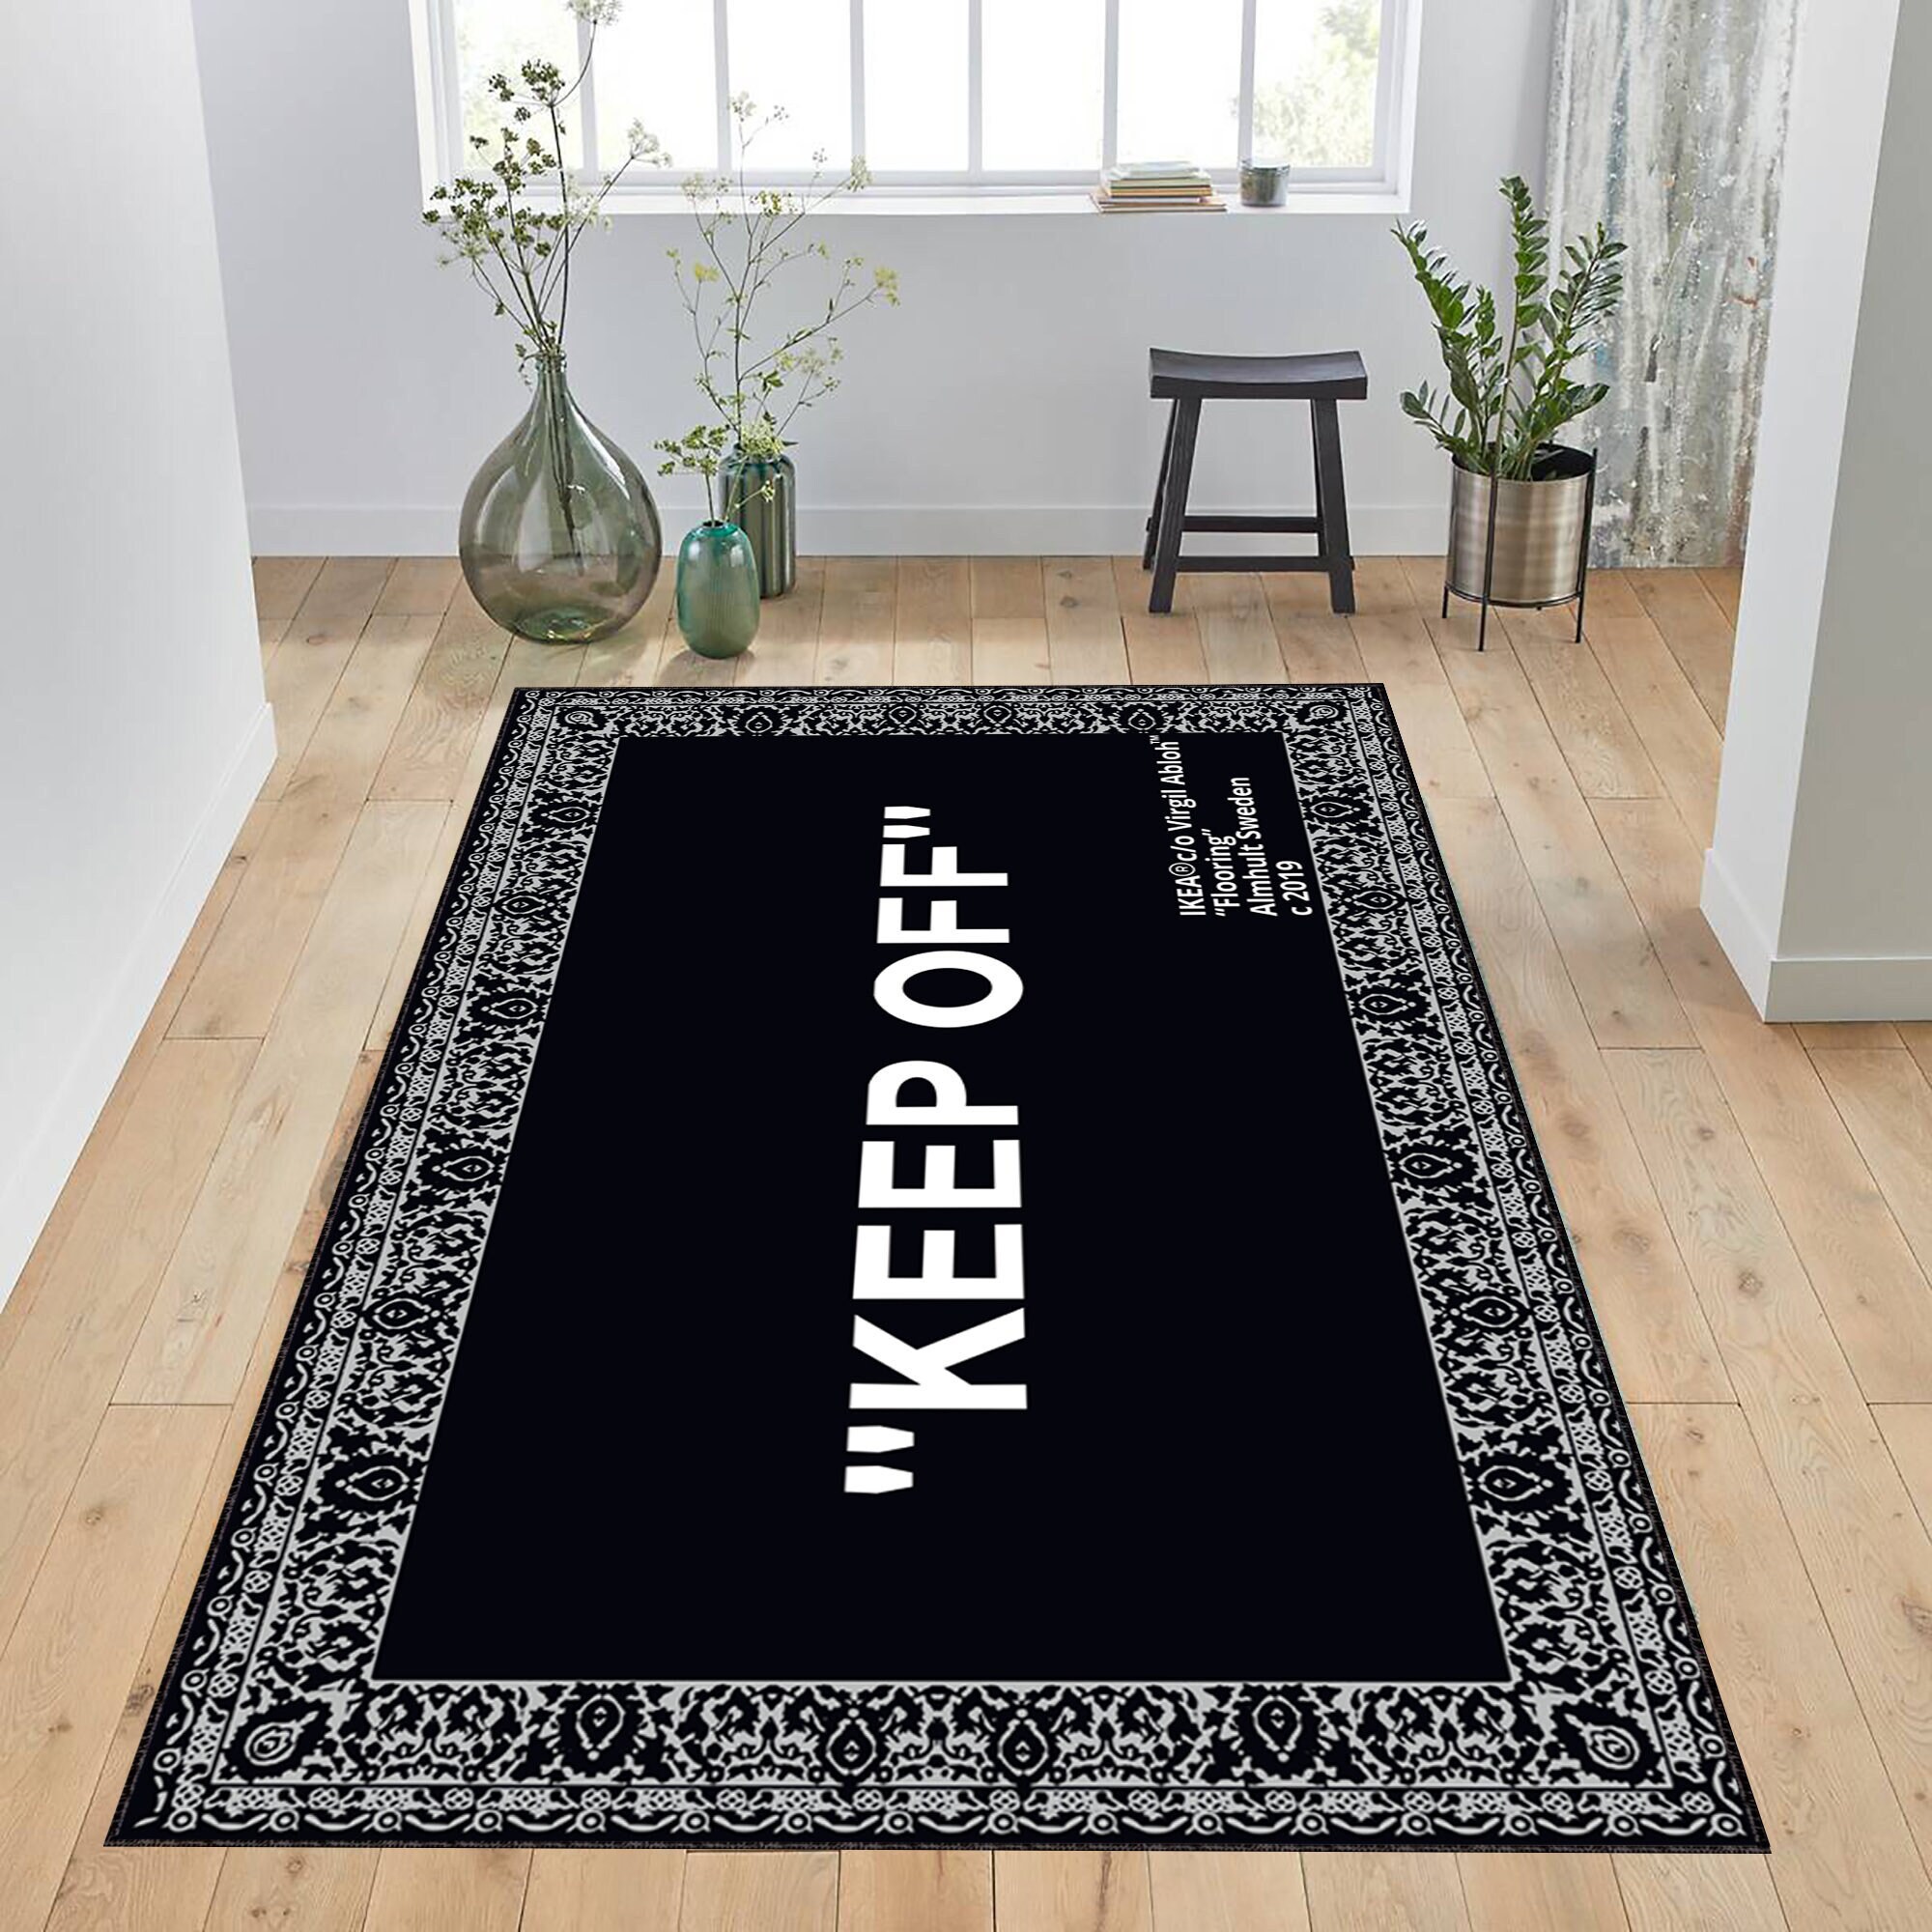 View of the Virgil Abloh's KEEP OFF IKEA rug on display at an